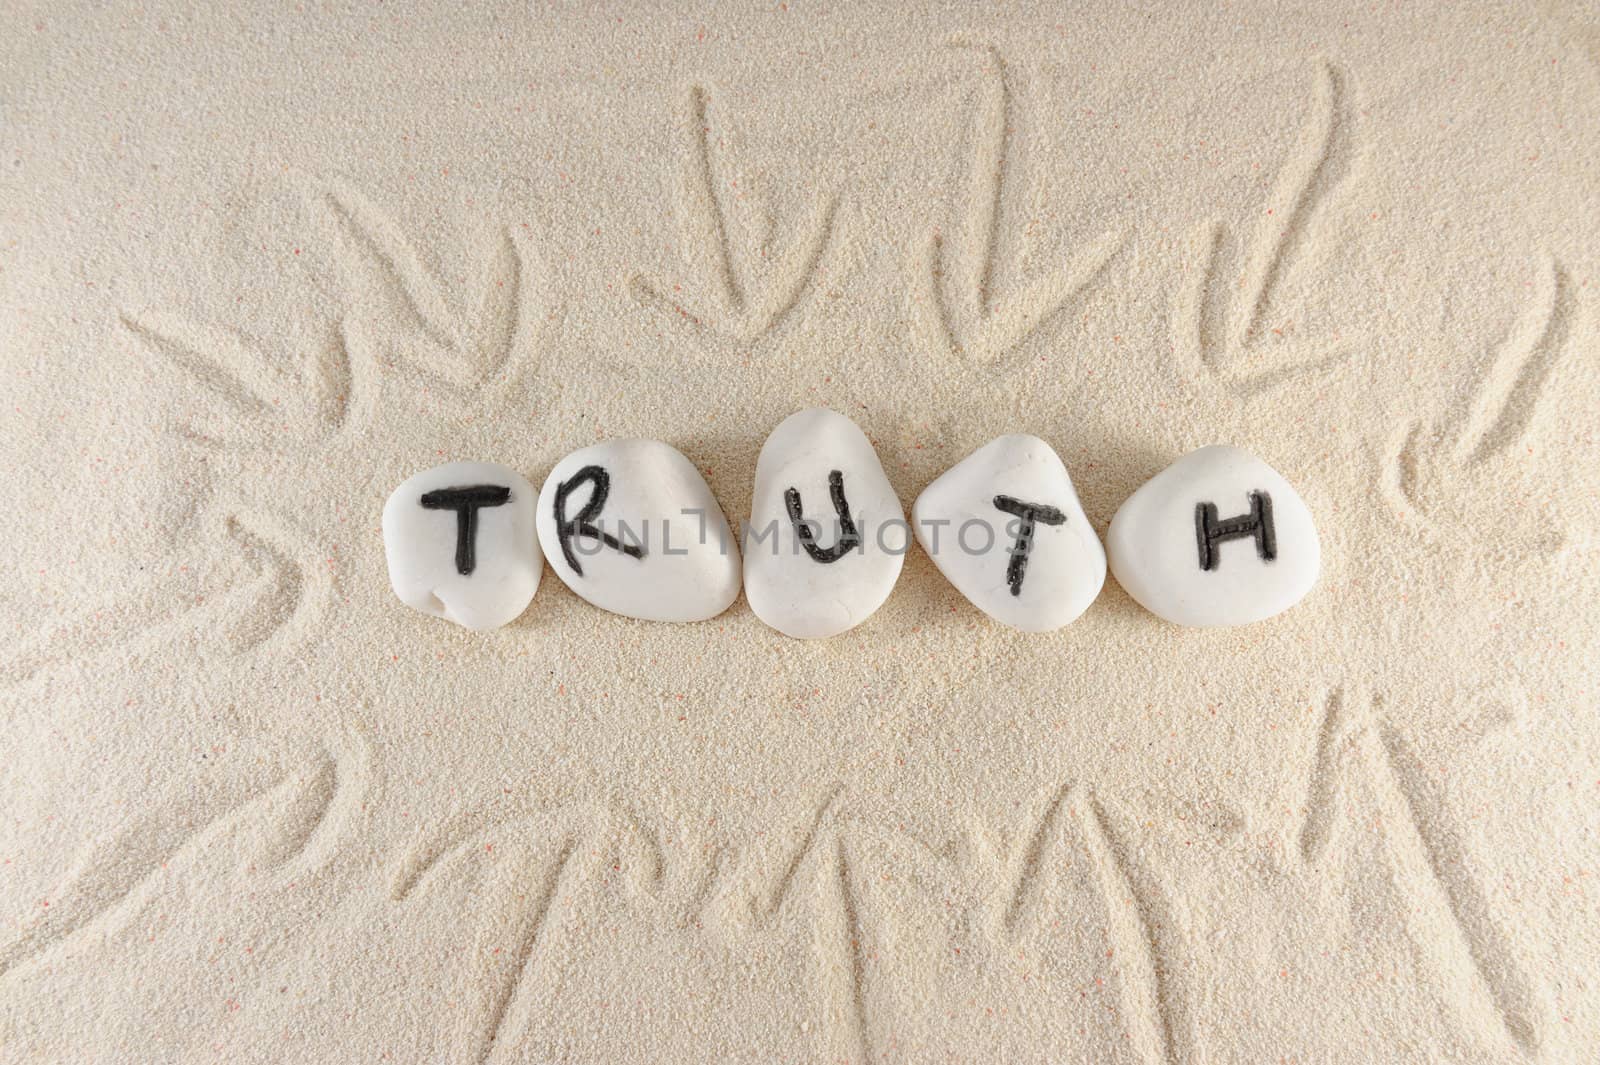 Truth word on group of stones on the sand